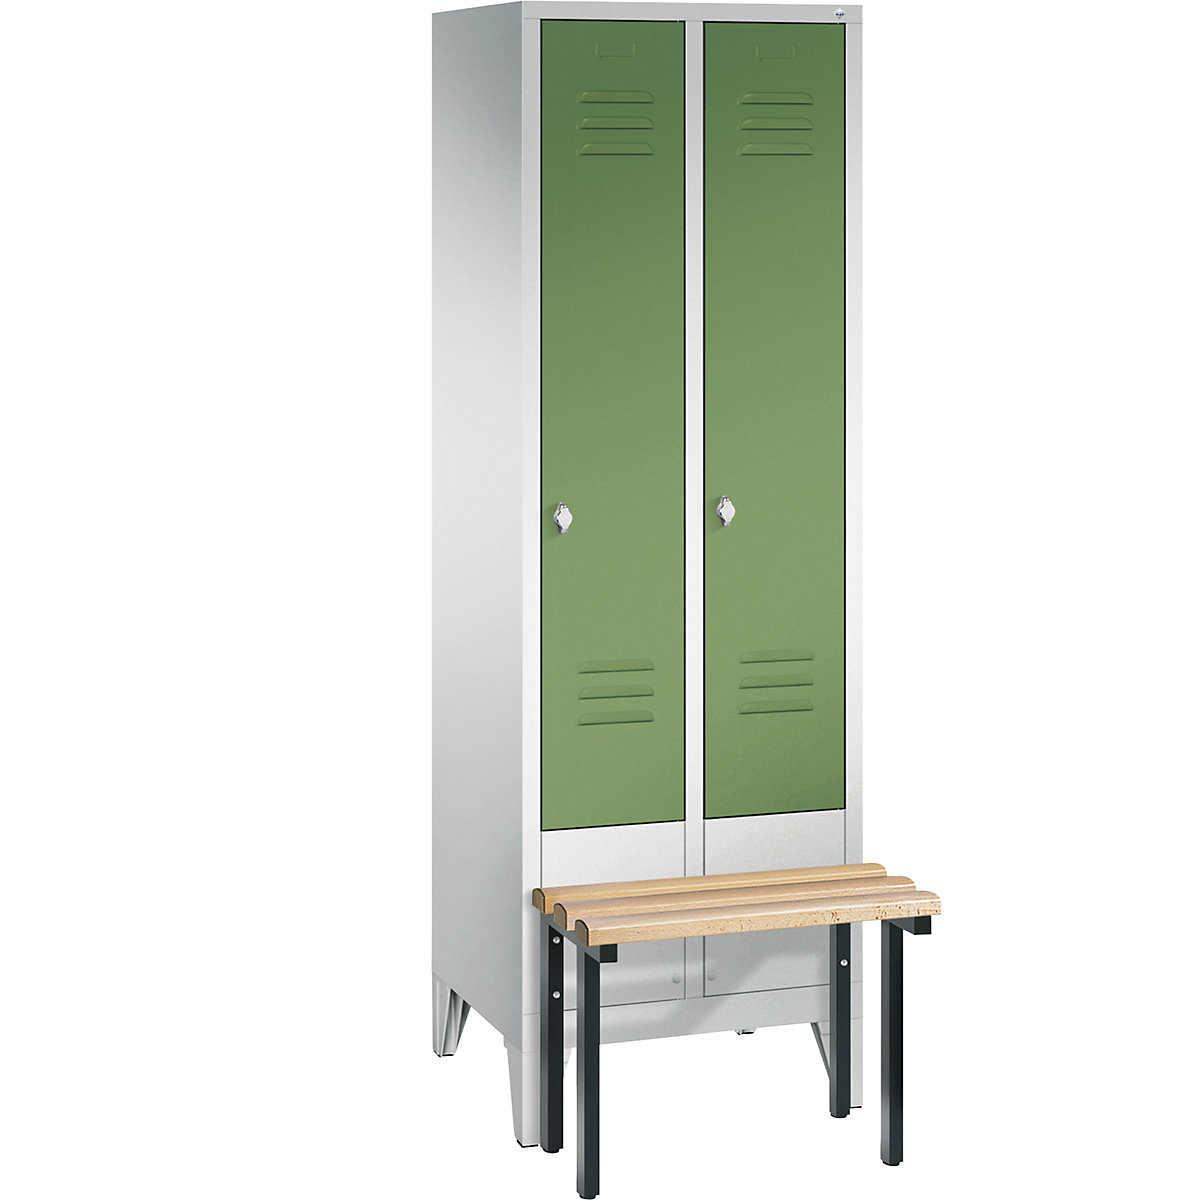 CLASSIC cloakroom locker with bench mounted in front – C+P, 2 compartments, compartment width 300 mm, light grey / reseda green-7